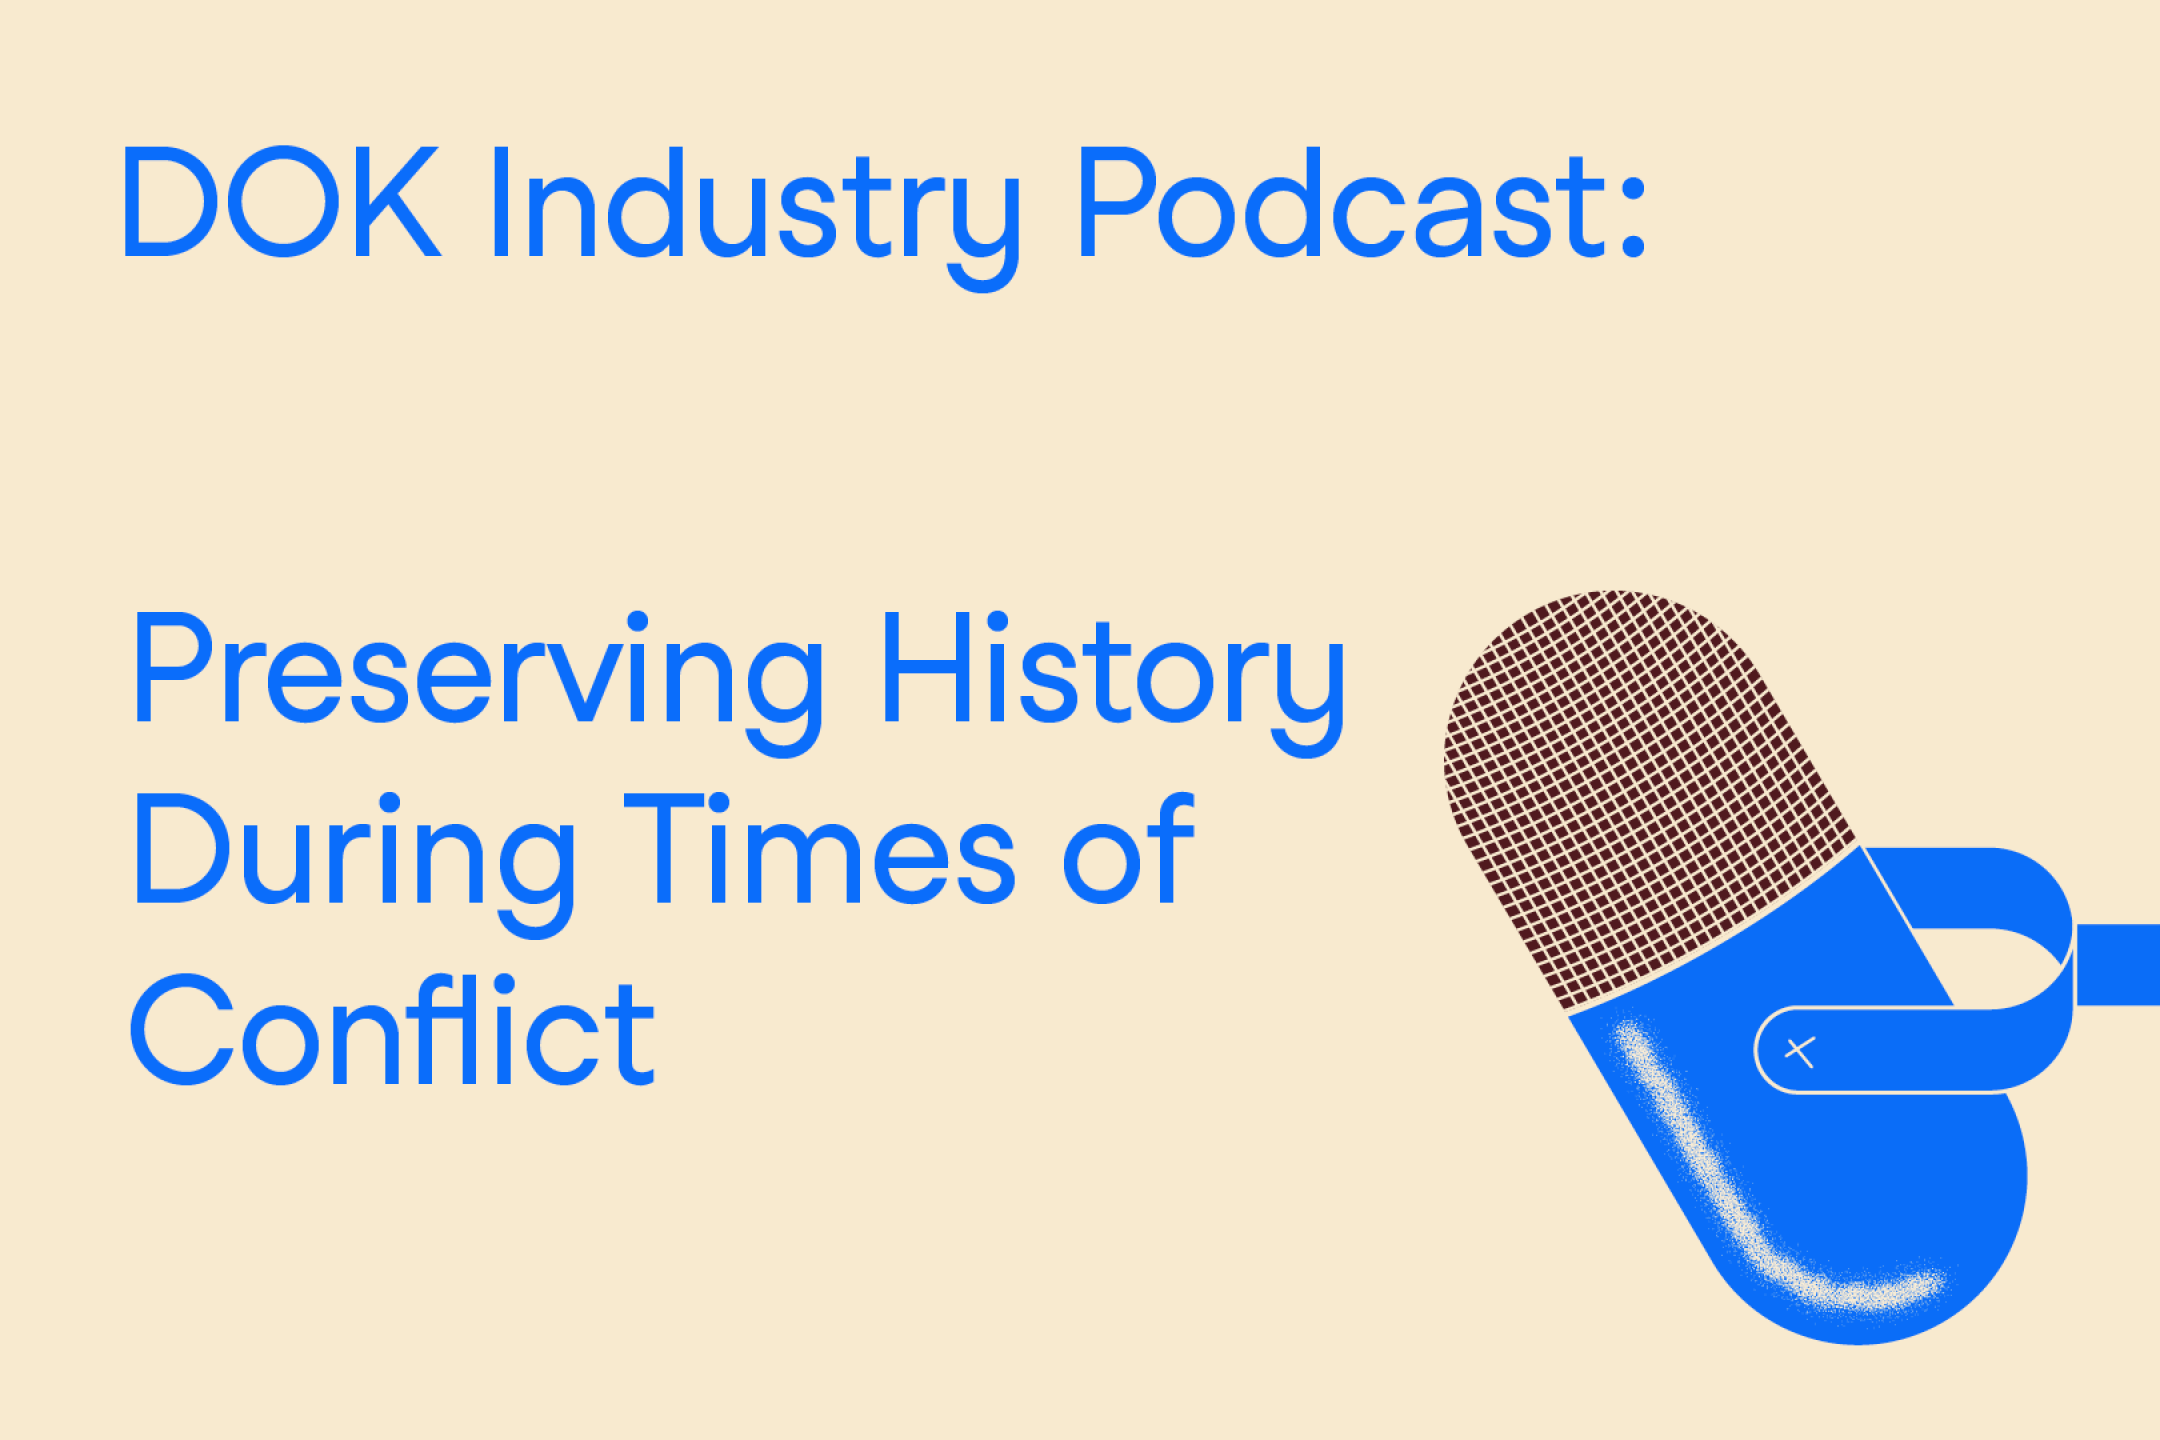 A text graphic with blue letters on a yellow background. At the right the illustration of a microphone. At the left the text: “Dok Industry Podcast: Preserving History During Times of Conflict”